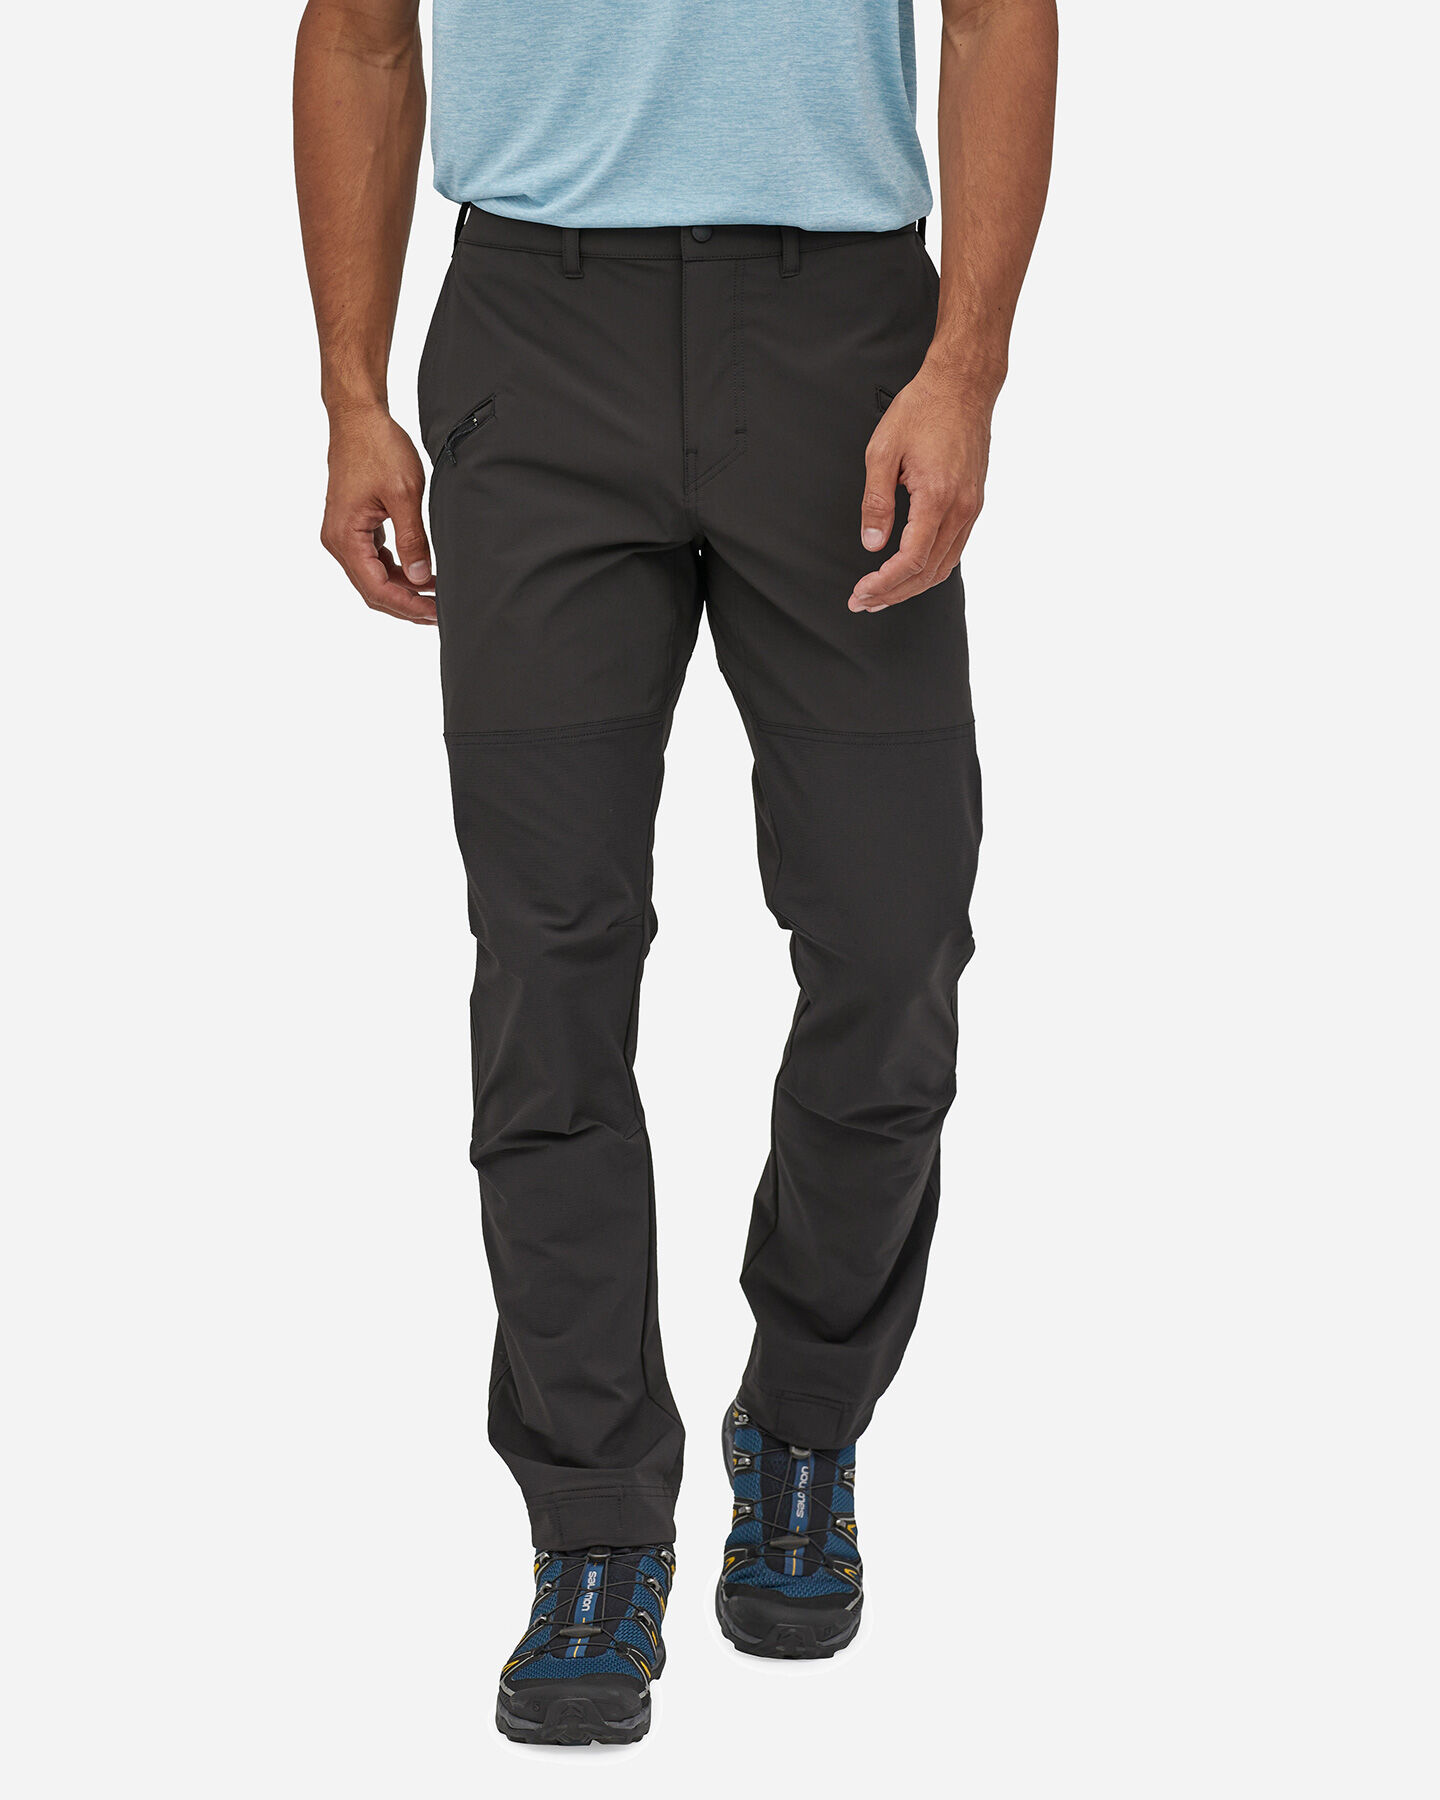  Pantalone outdoor PATAGONIA POINT PEAK TRAIL M S4097087|BLK|30 scatto 0